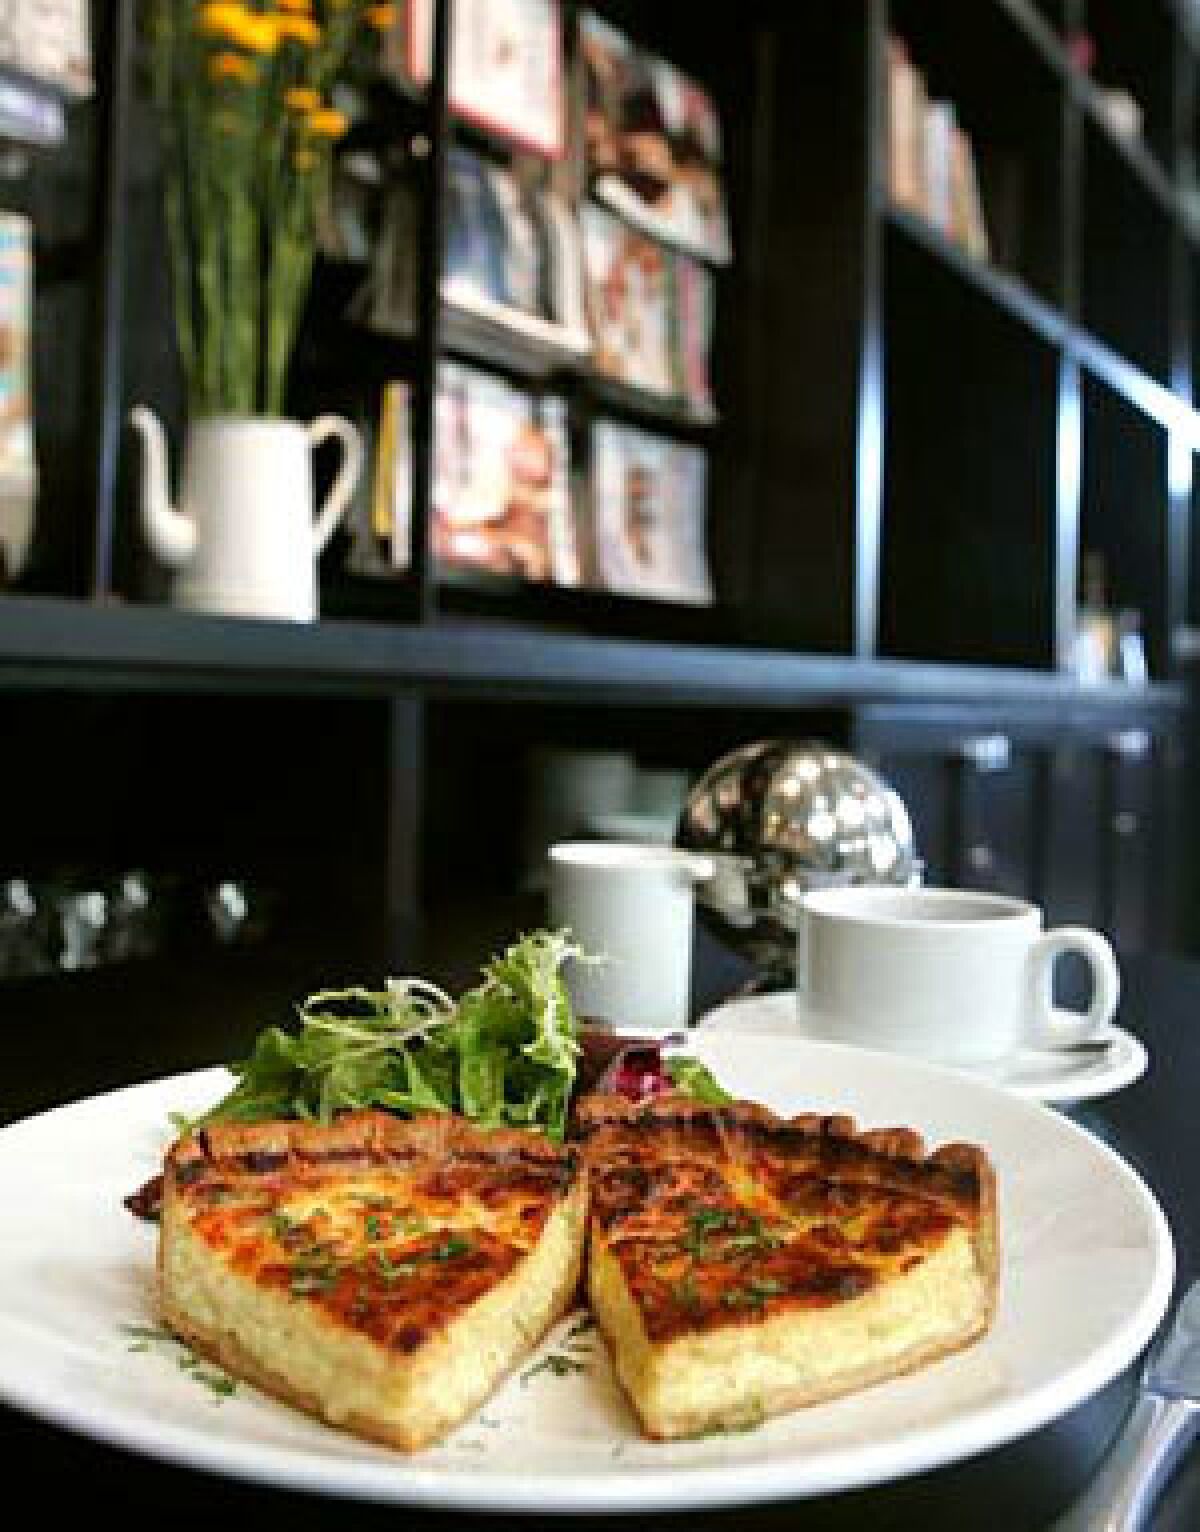 COMME ÇA: You can opt for a rich quiche with Gruyère or go lighter with the house-dried-raisin bread and baguette.